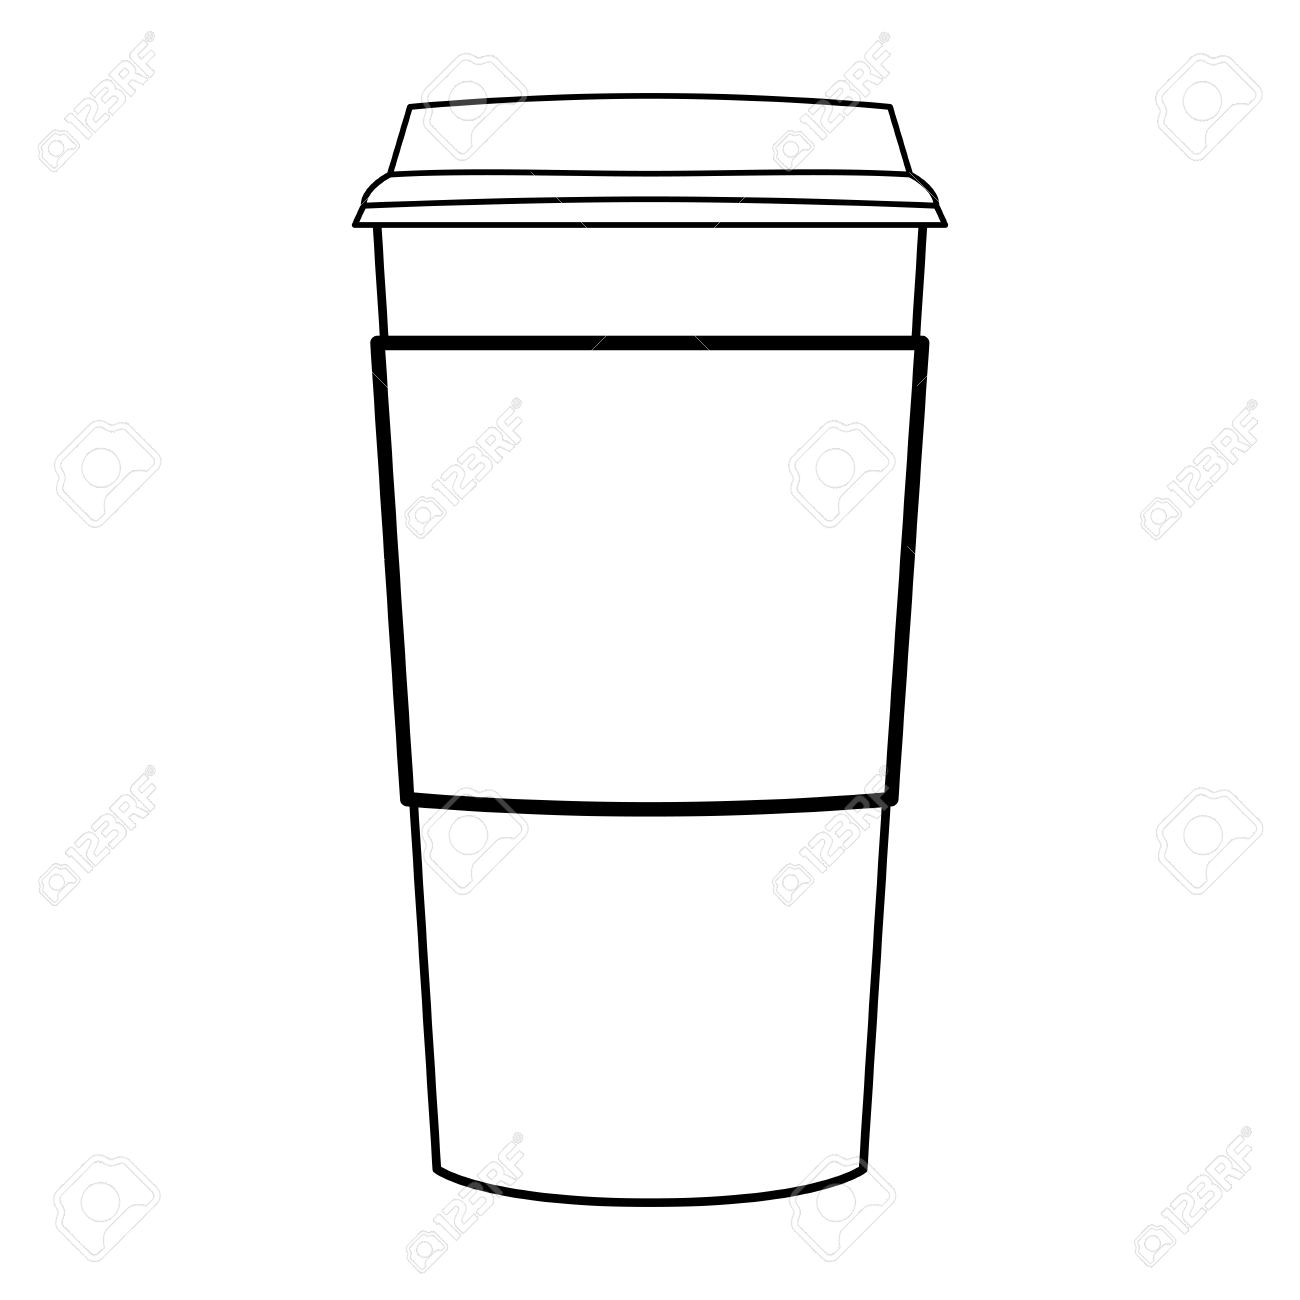 free clip art paper coffee cup - photo #27